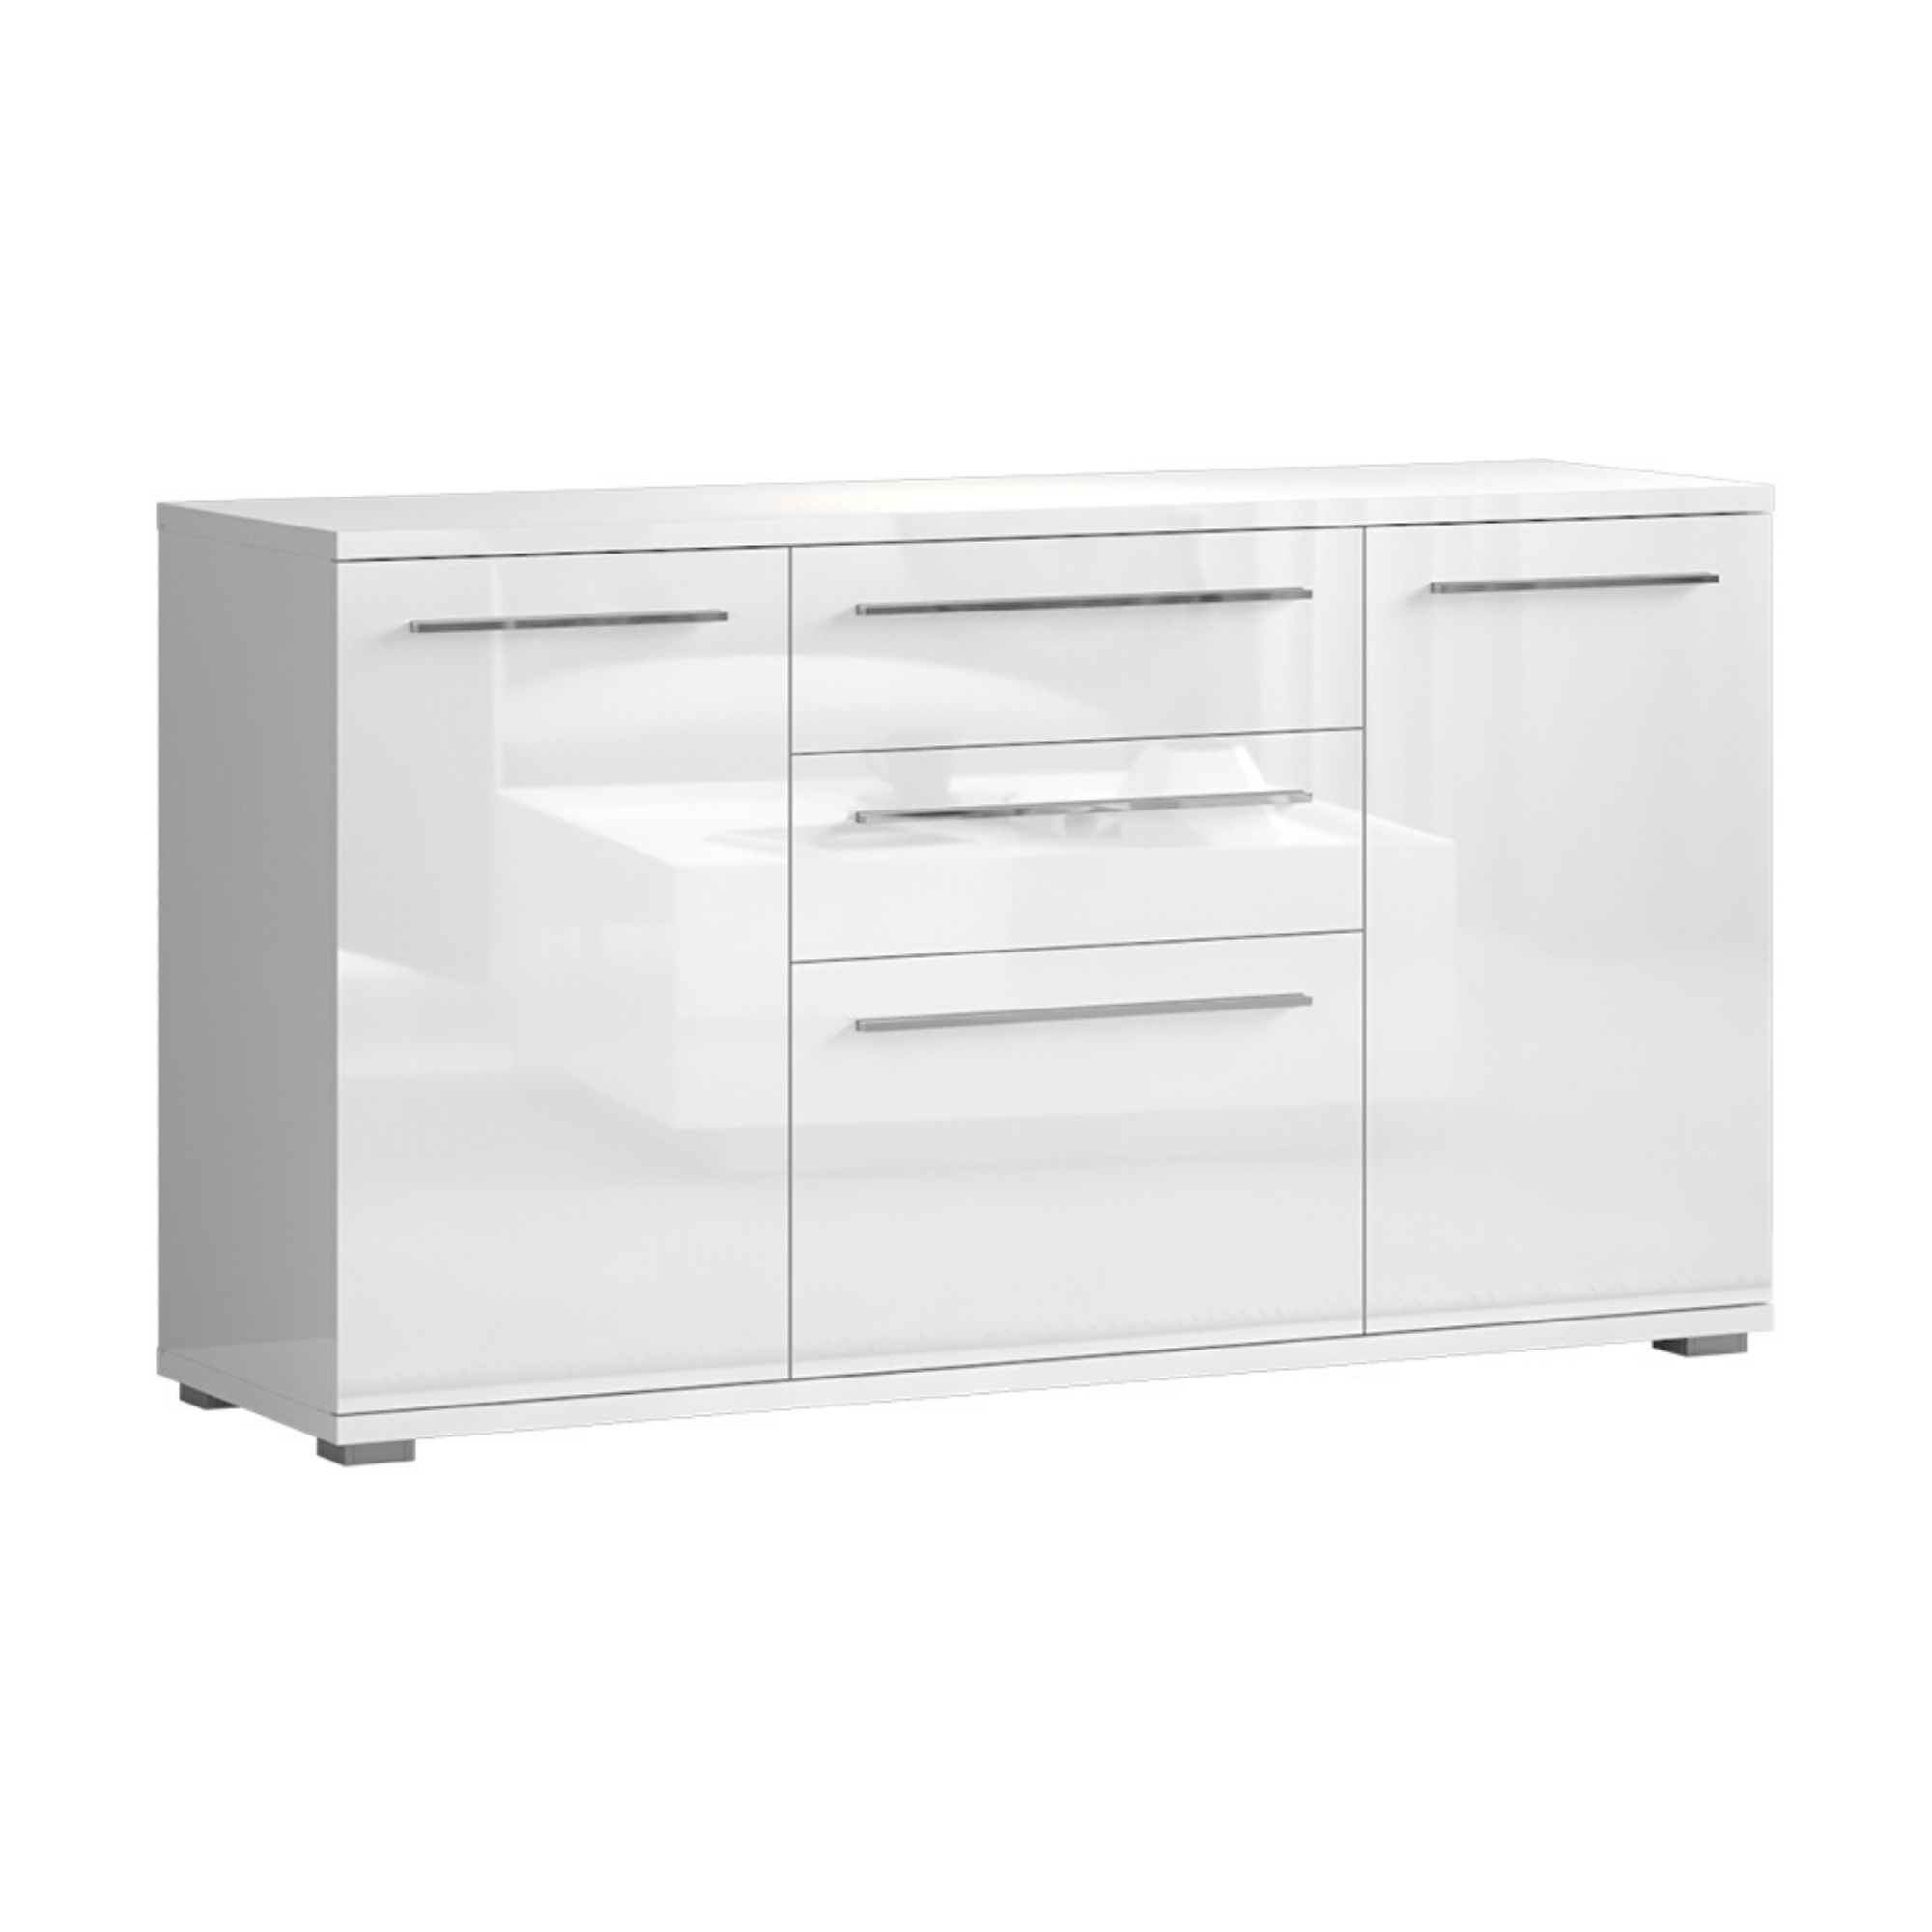 Piano 59 inch 3 Cabinet 2 Drawers High Gloss Sideboard - Furniture.Agency